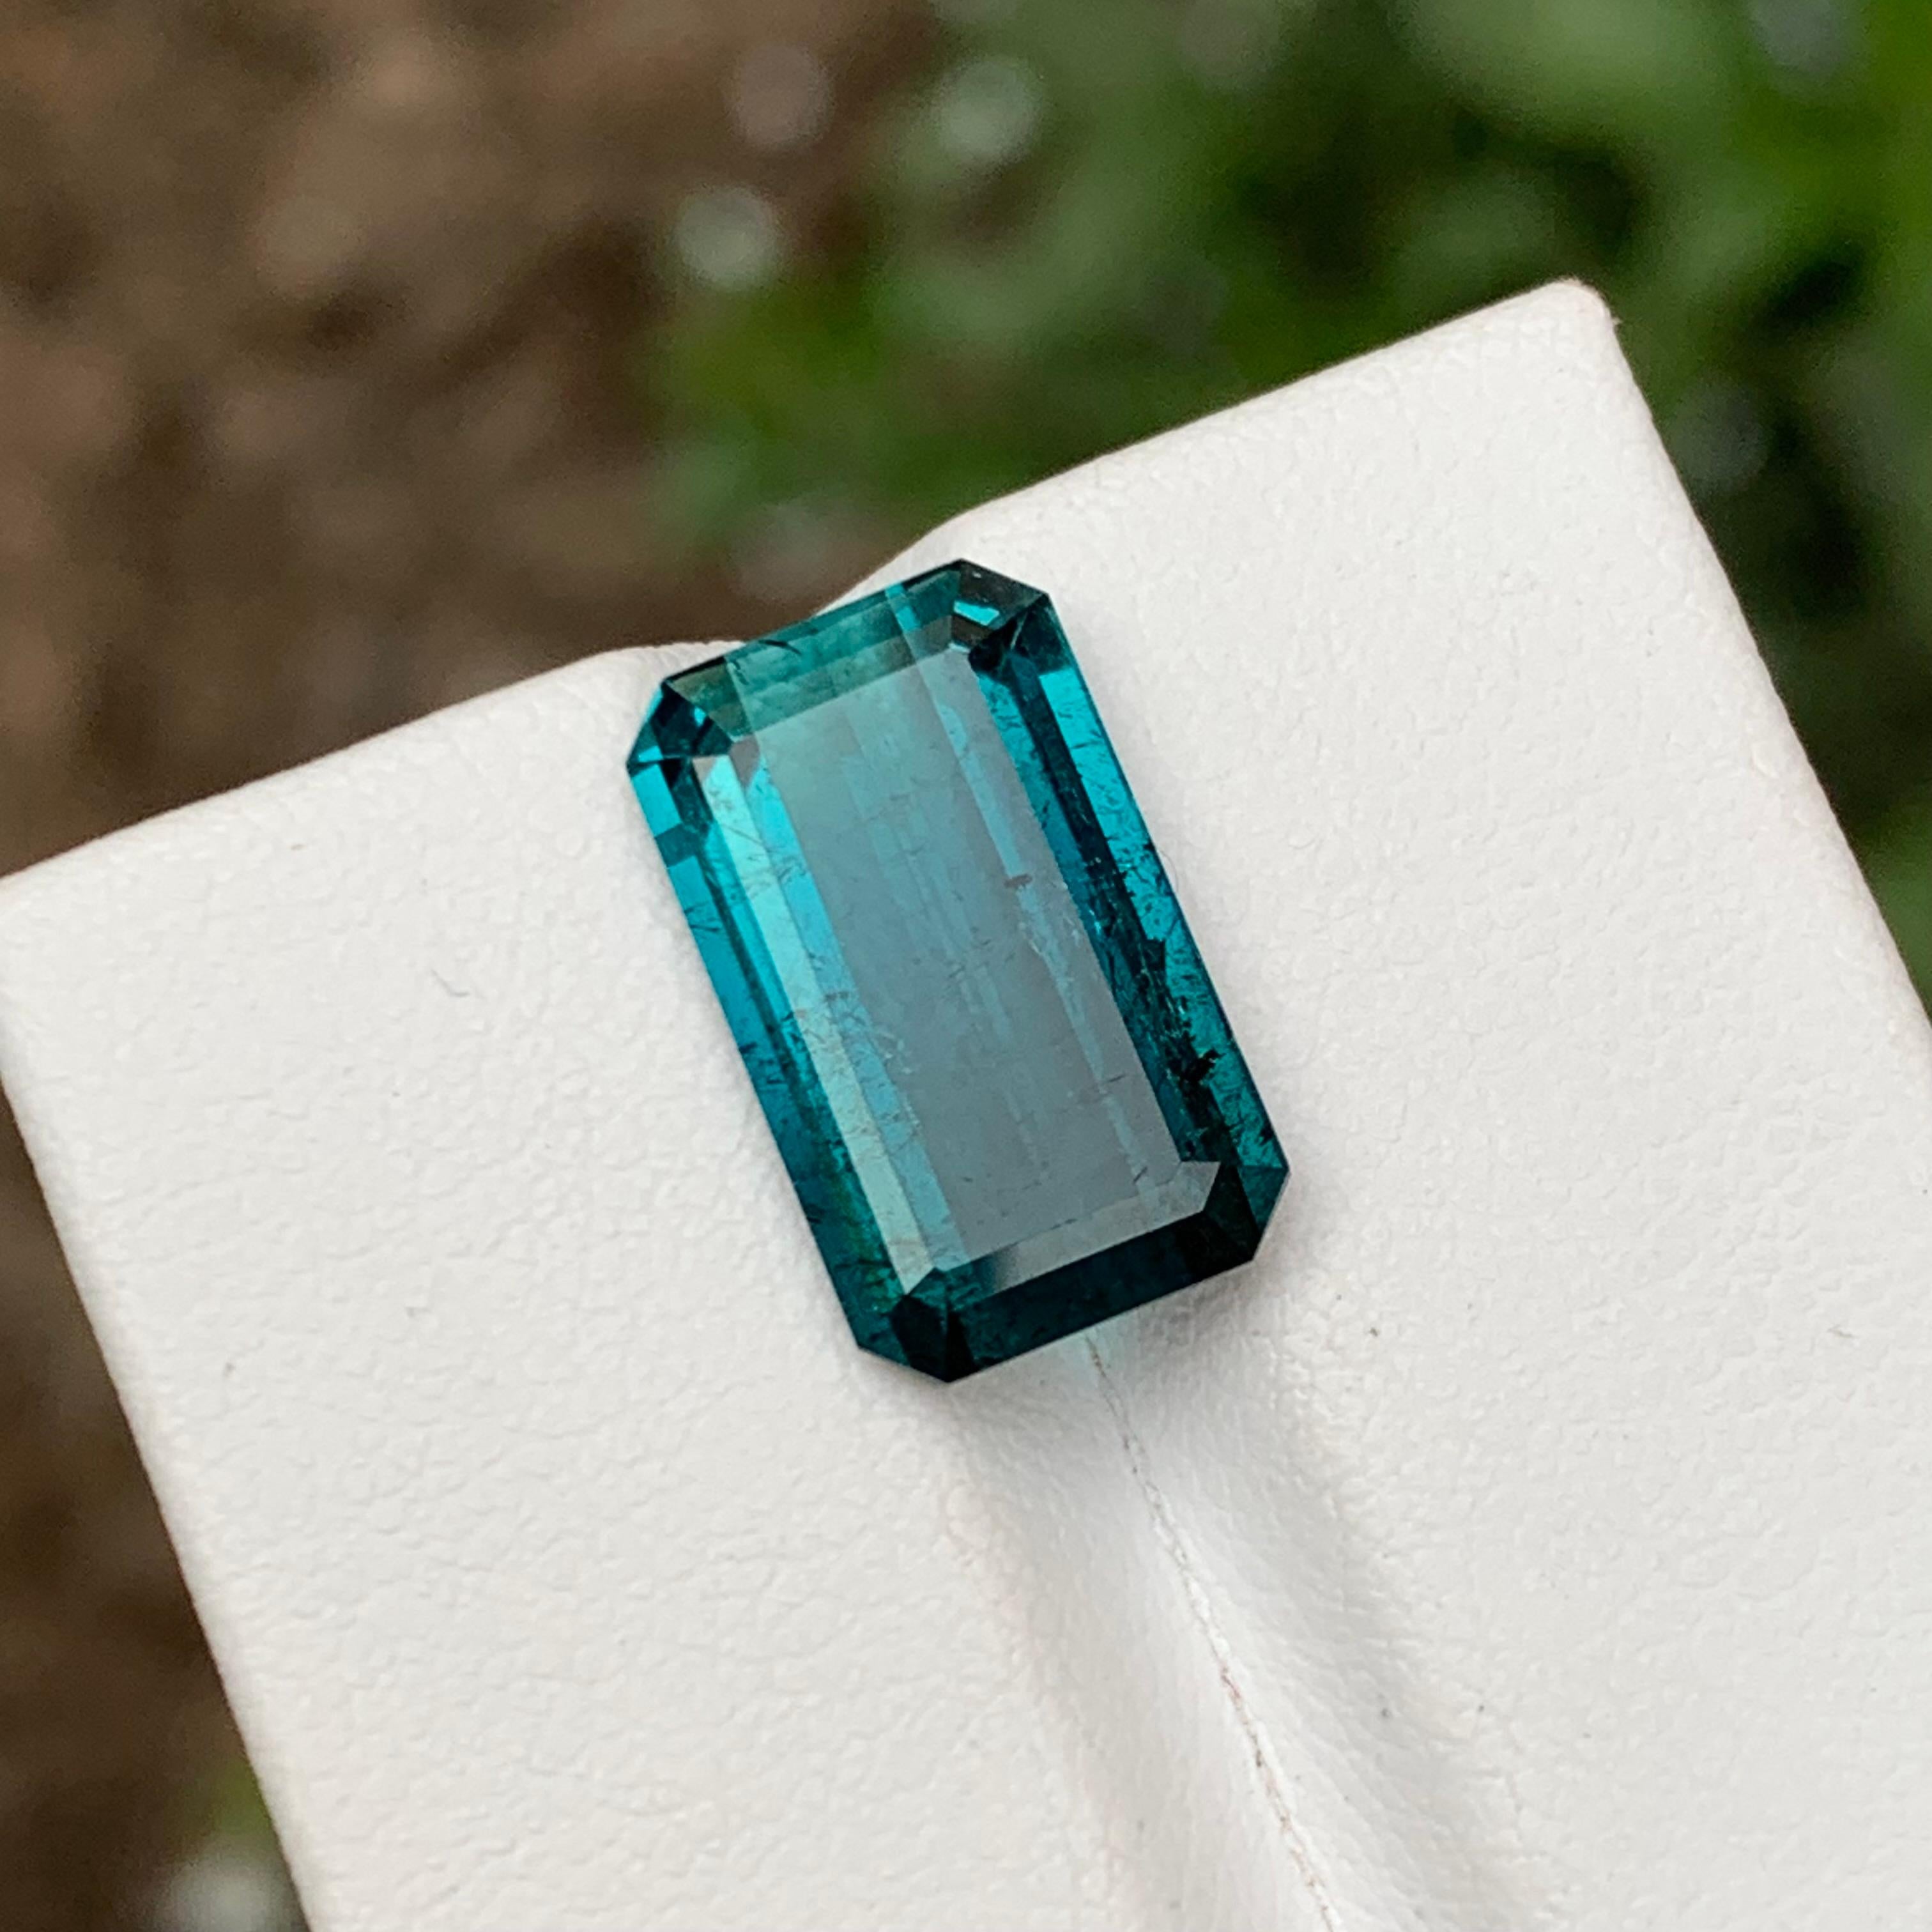 Rare Vivid Neon Blue Tourmaline Gemstone, 6.60 Ct Emerald Cut for Pendant/Ring In New Condition For Sale In Peshawar, PK